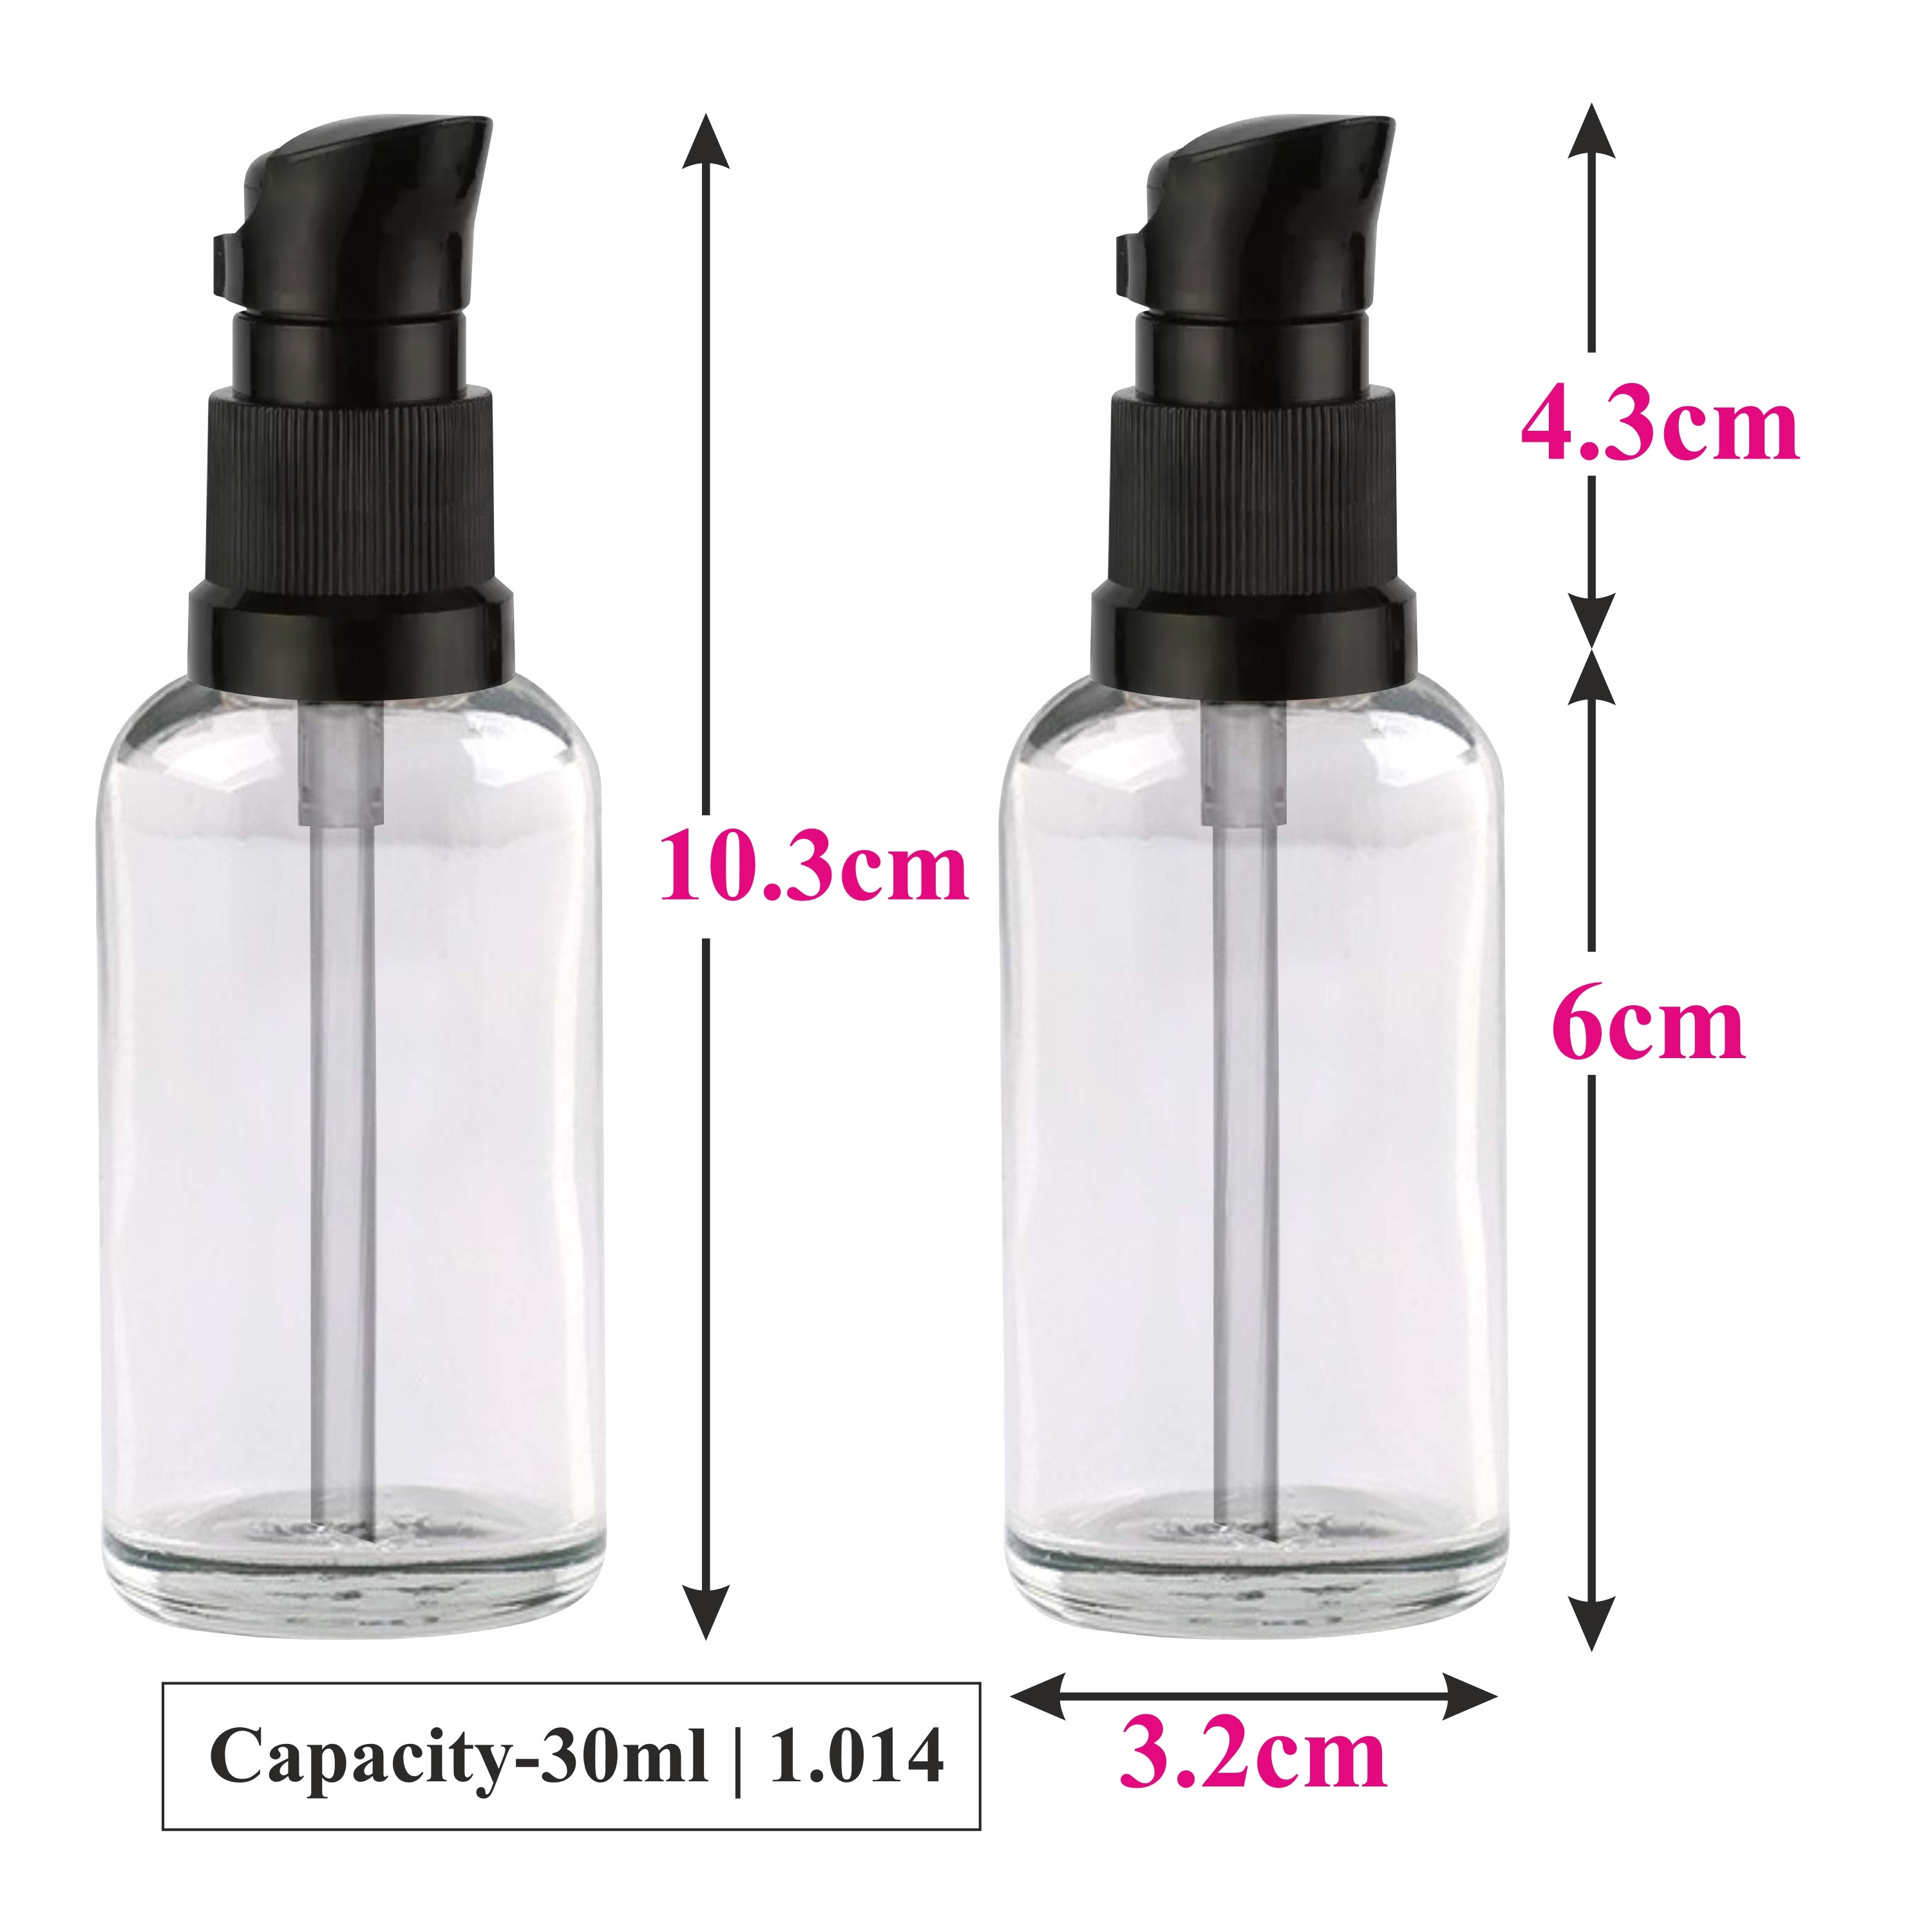 PREMIUM EMPTY TRANSPARENT GLASS BOTTLE WITH BLACK LOTION PUMP AVAILABLE SIZE 15ML, 25ML, 30ML |ZMG39|